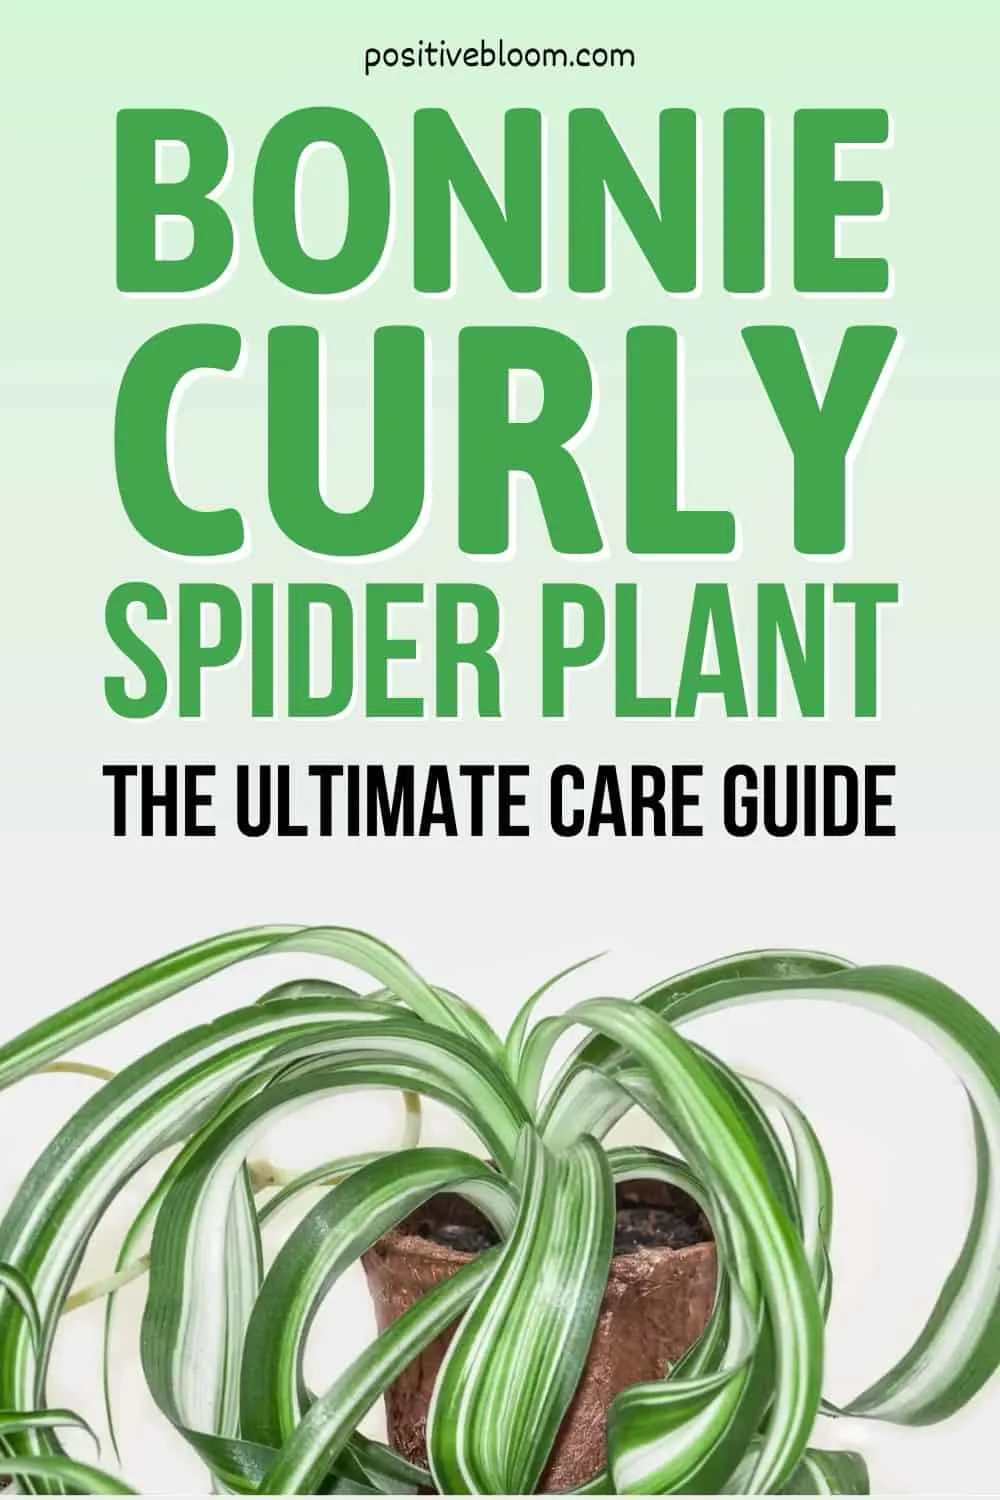 Bonnie Curly Spider Plant The Ultimate Care Guide Pinterest